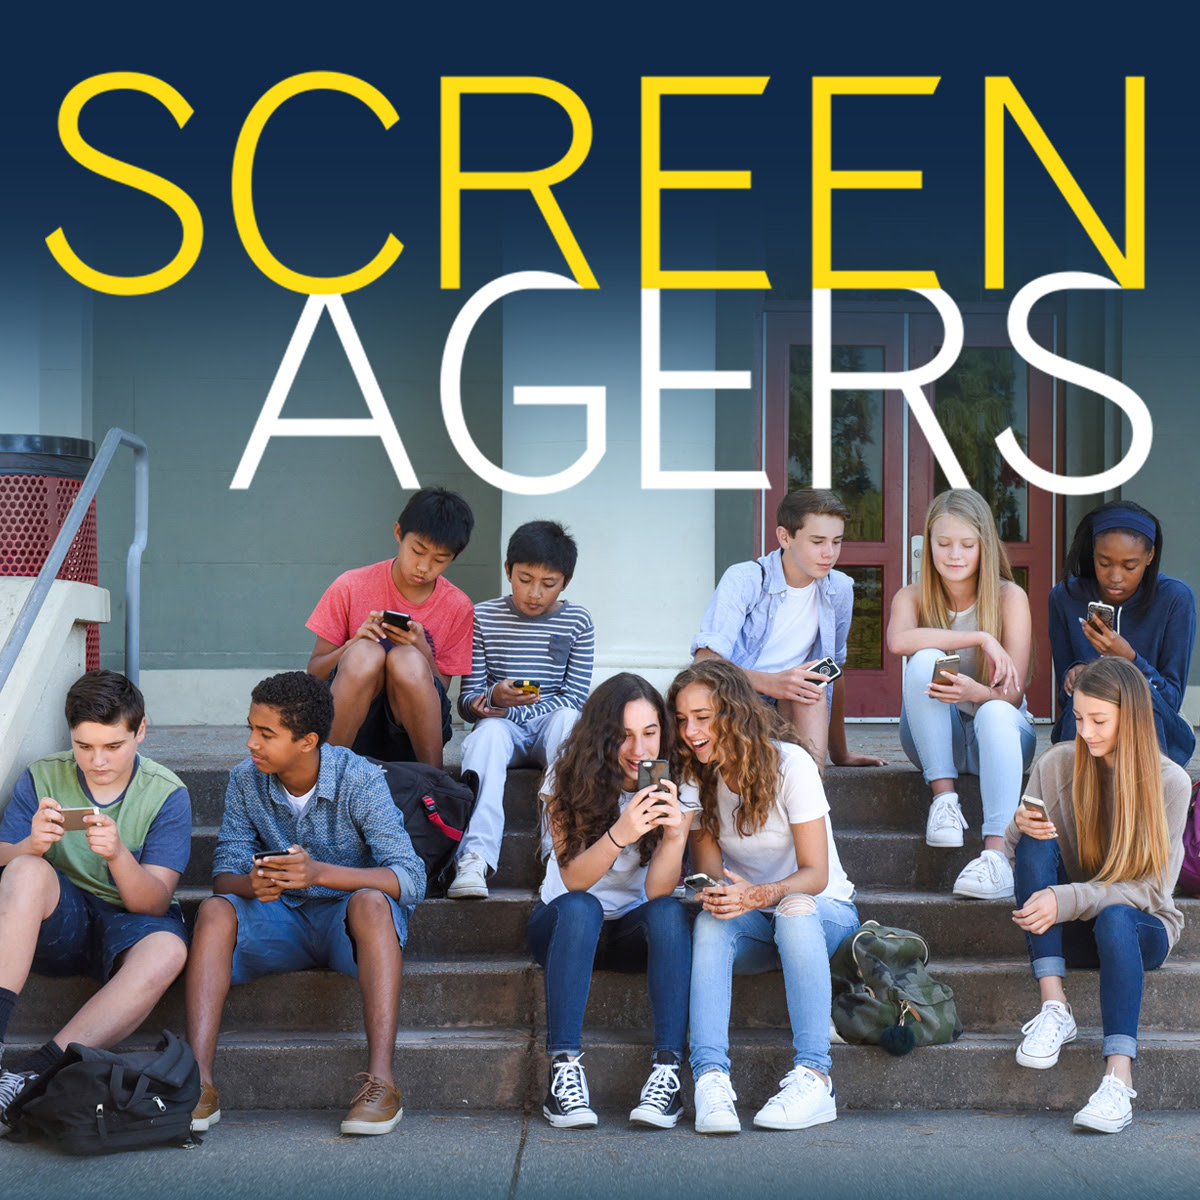 Screenagers Film Presented By Baldwin-Whitehall School District